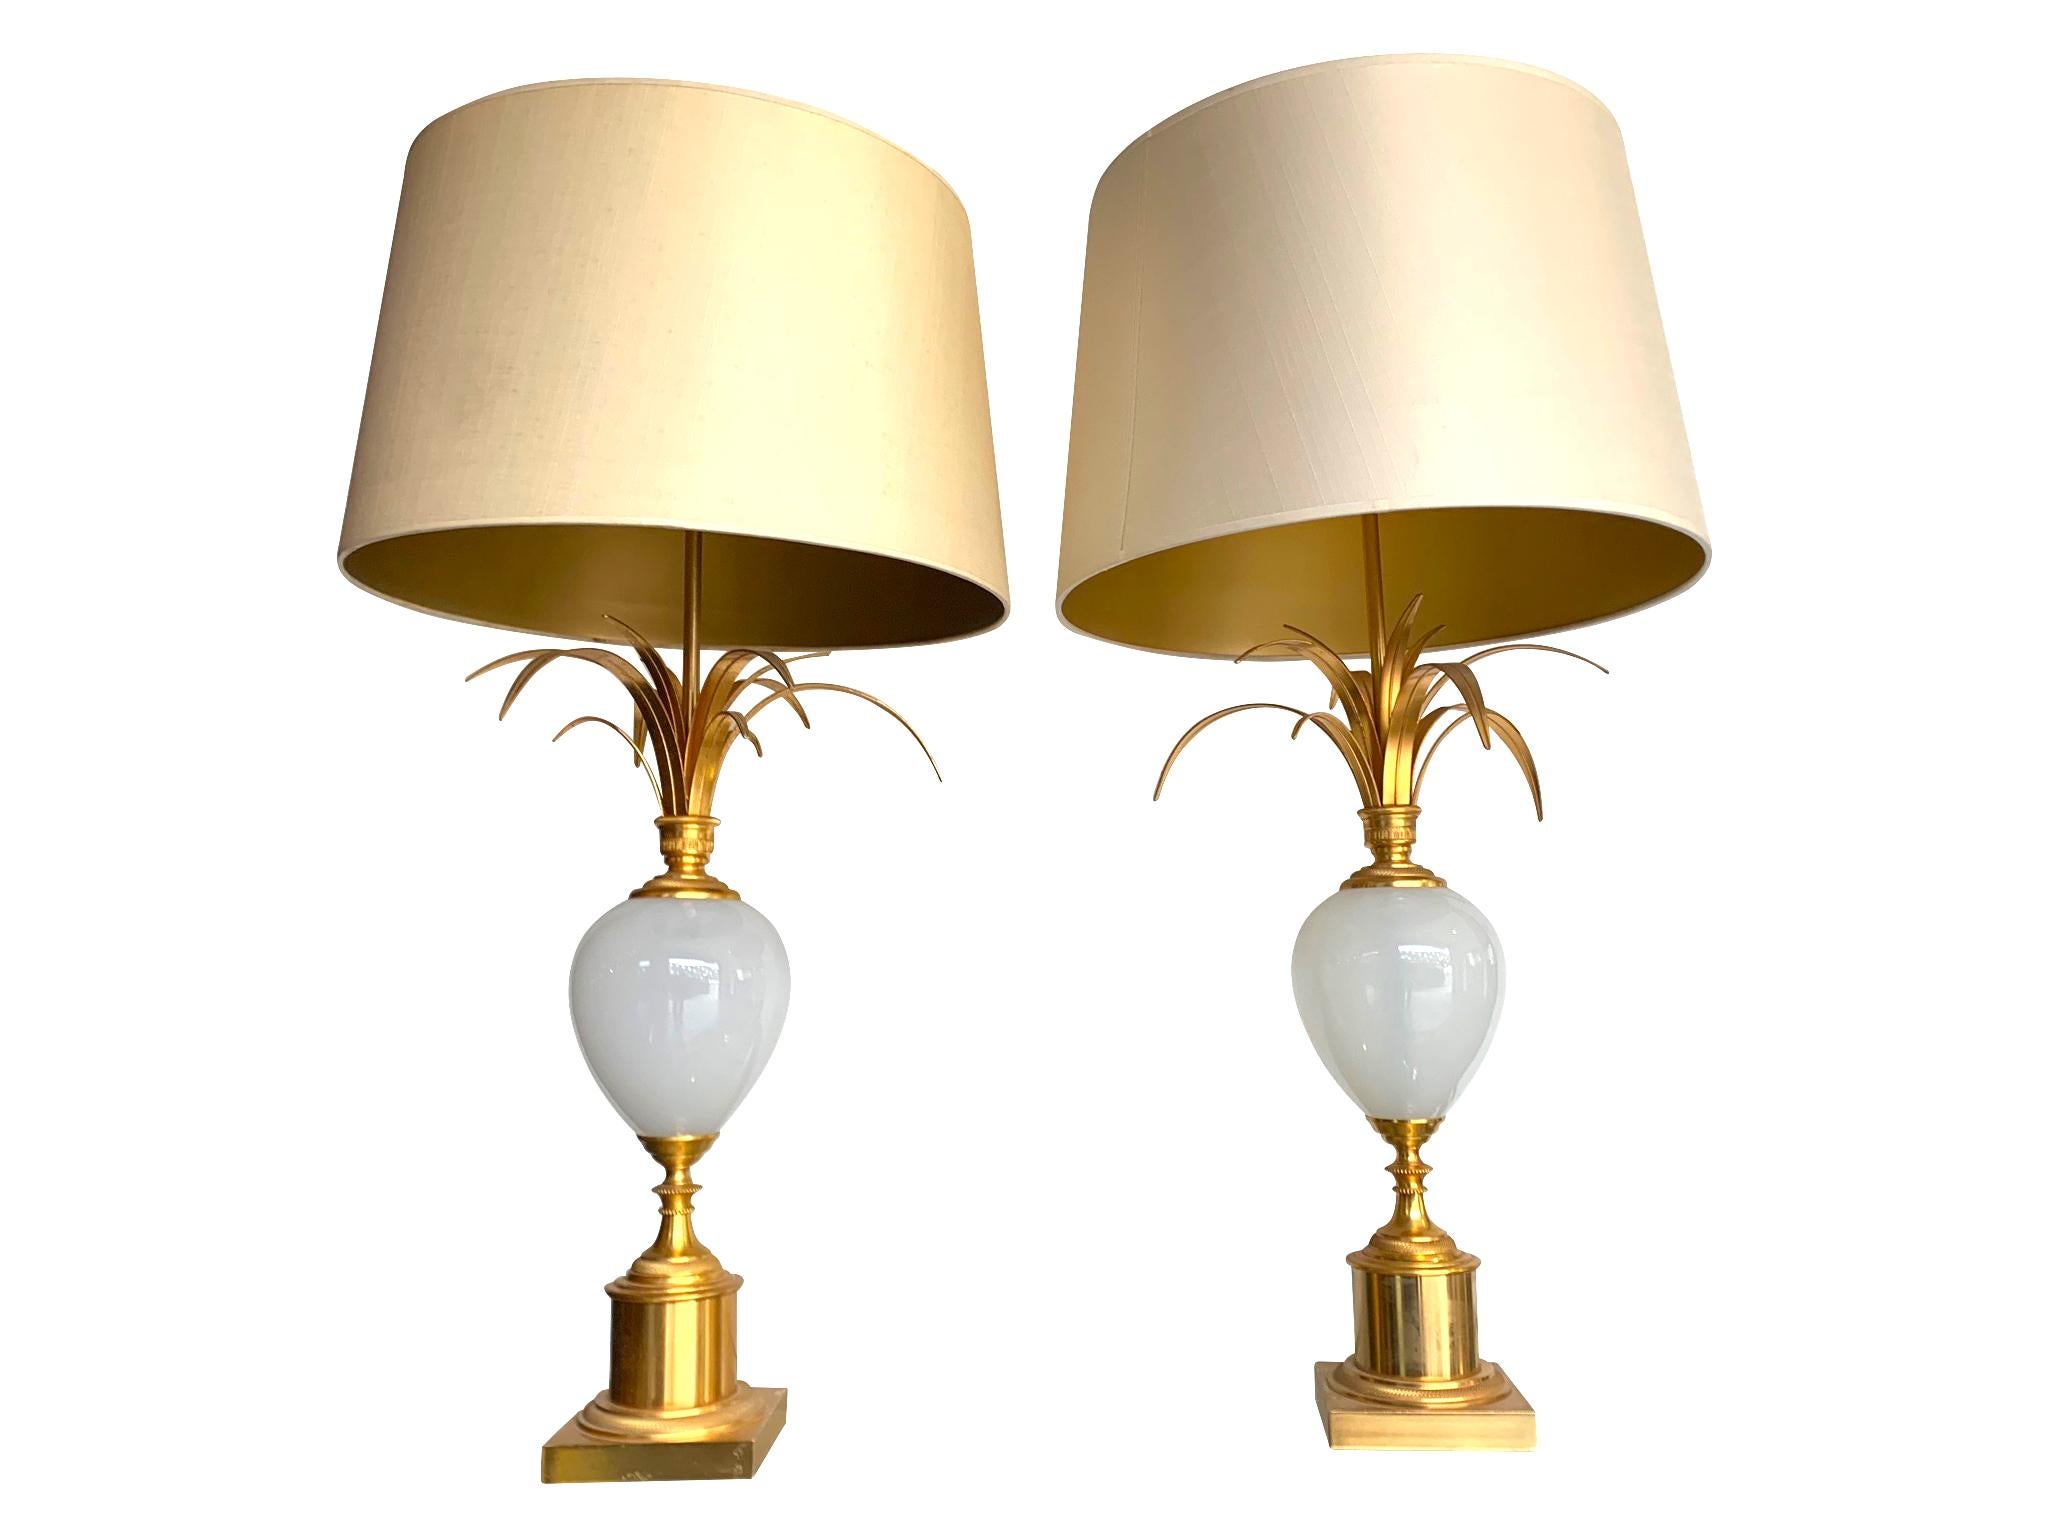 Gilt Pair of Maison Charles Style Lamps by S A Boulanger with Opaline Glass Eggs